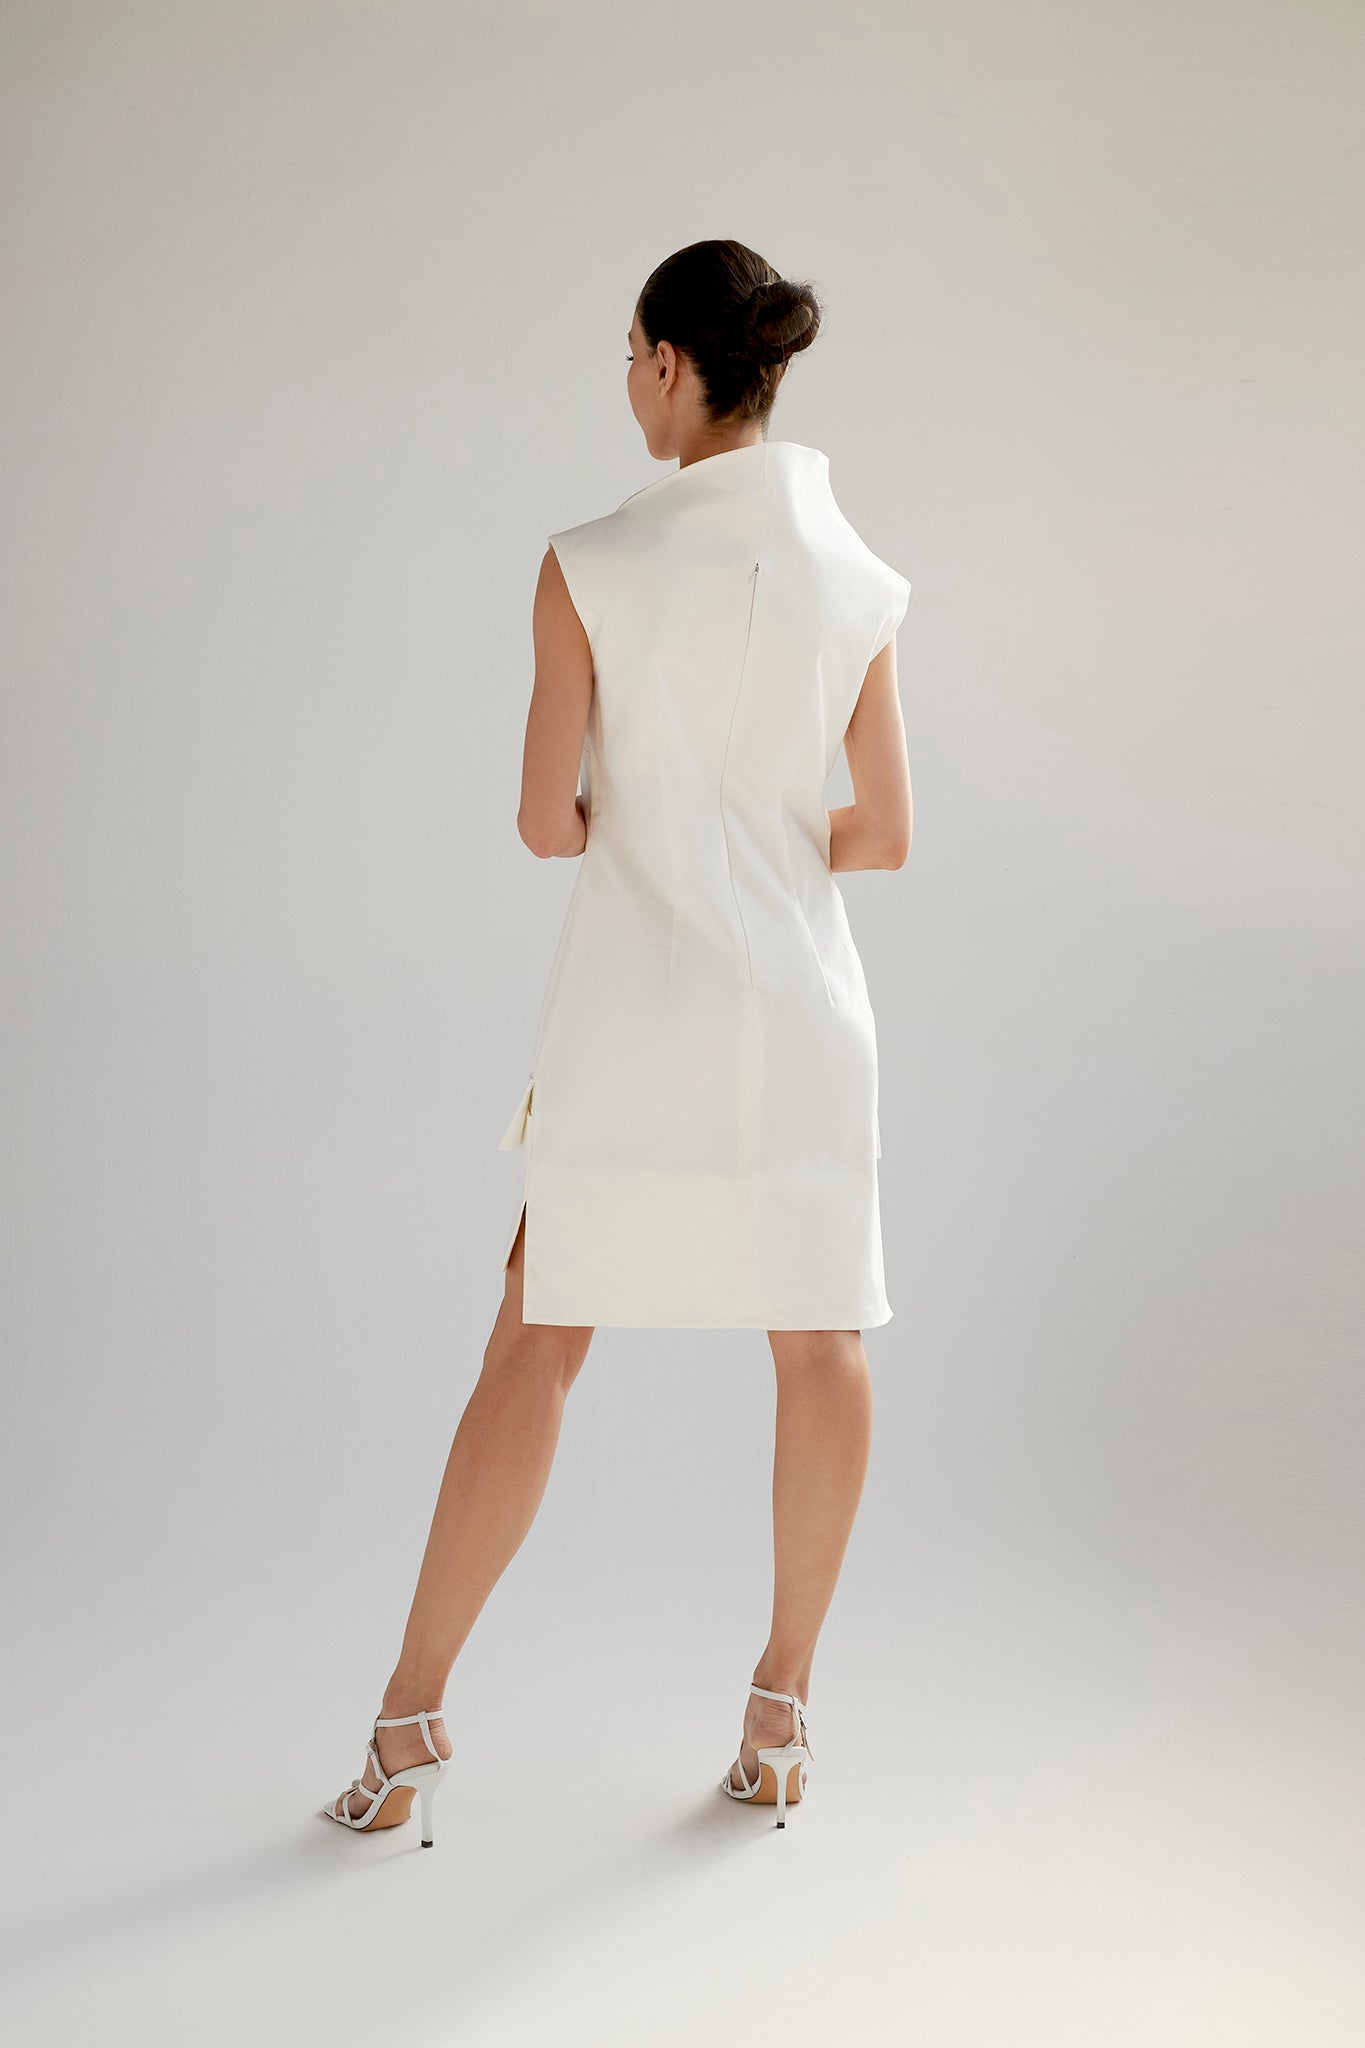 Cap sleeve short dress with hanging pockets in white